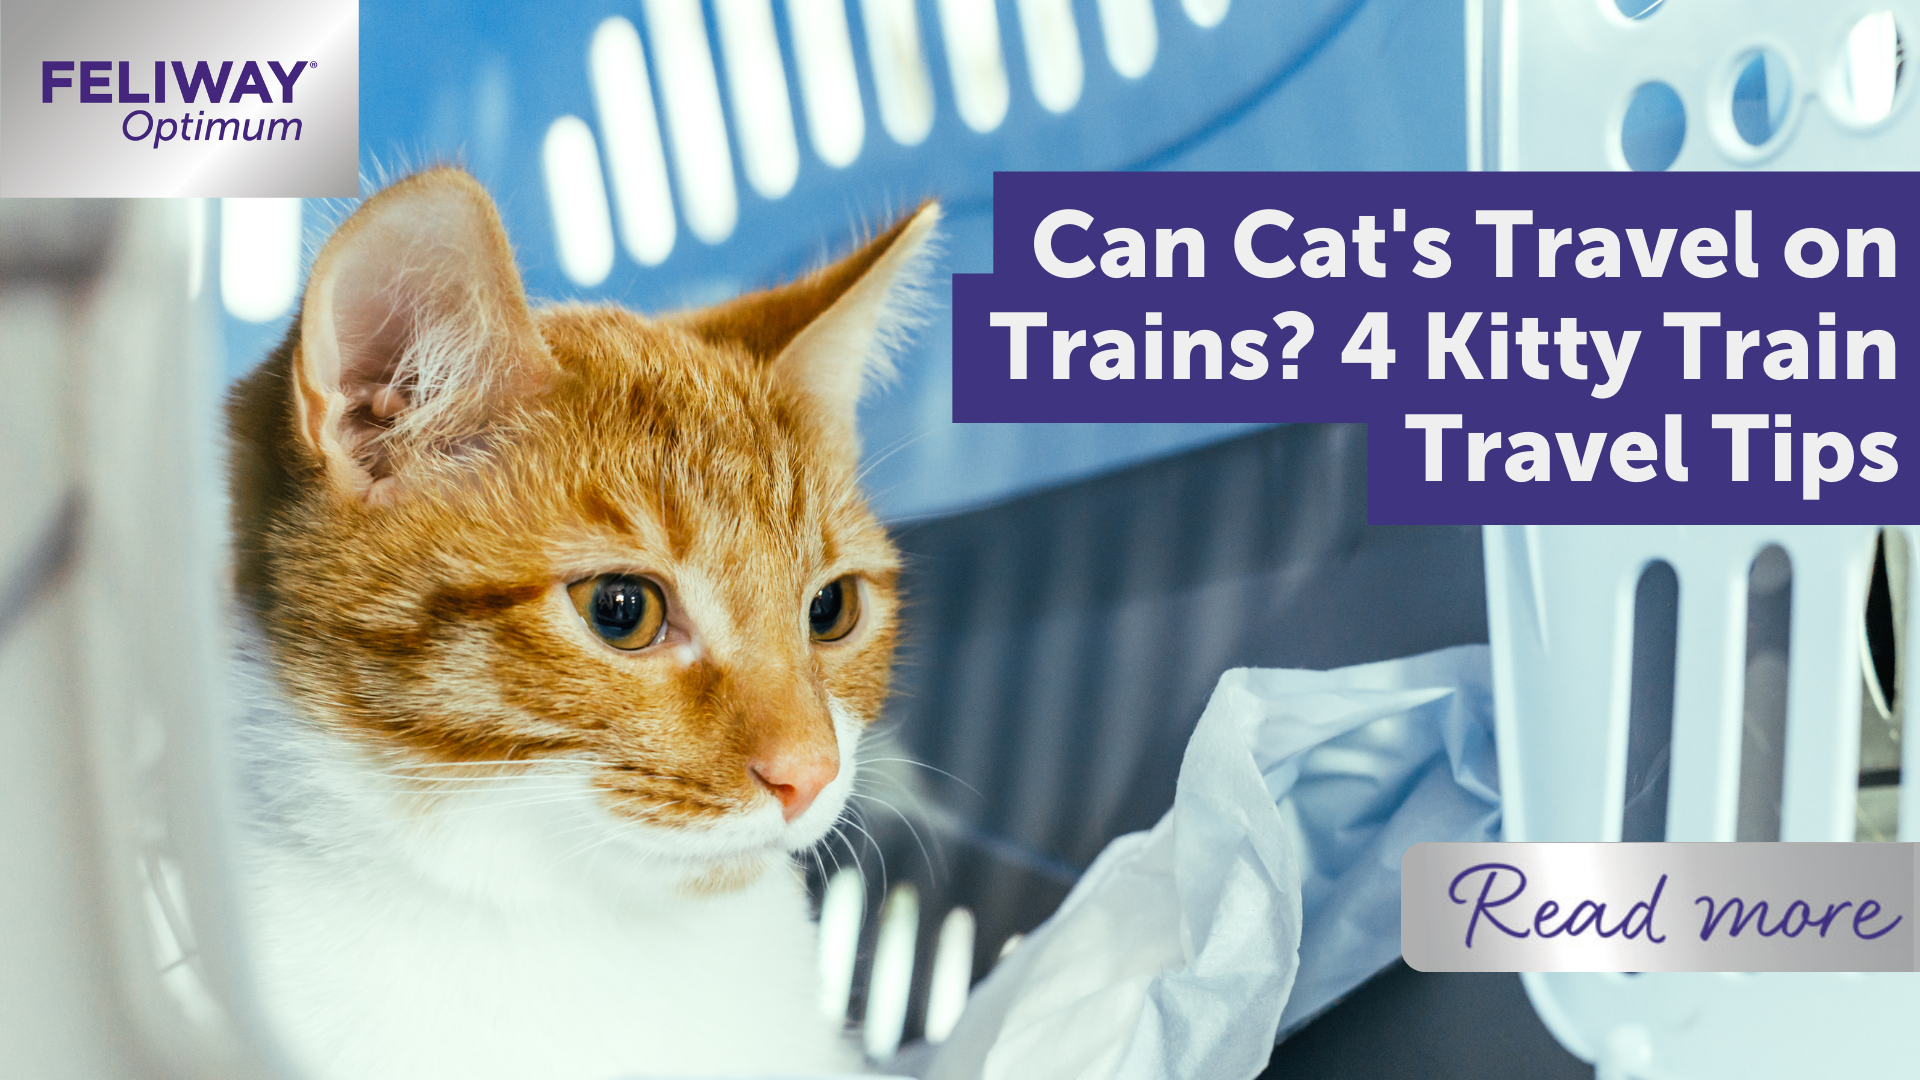 Can Cat's Travel on Trains? 4 Kitty Train Travel Tips